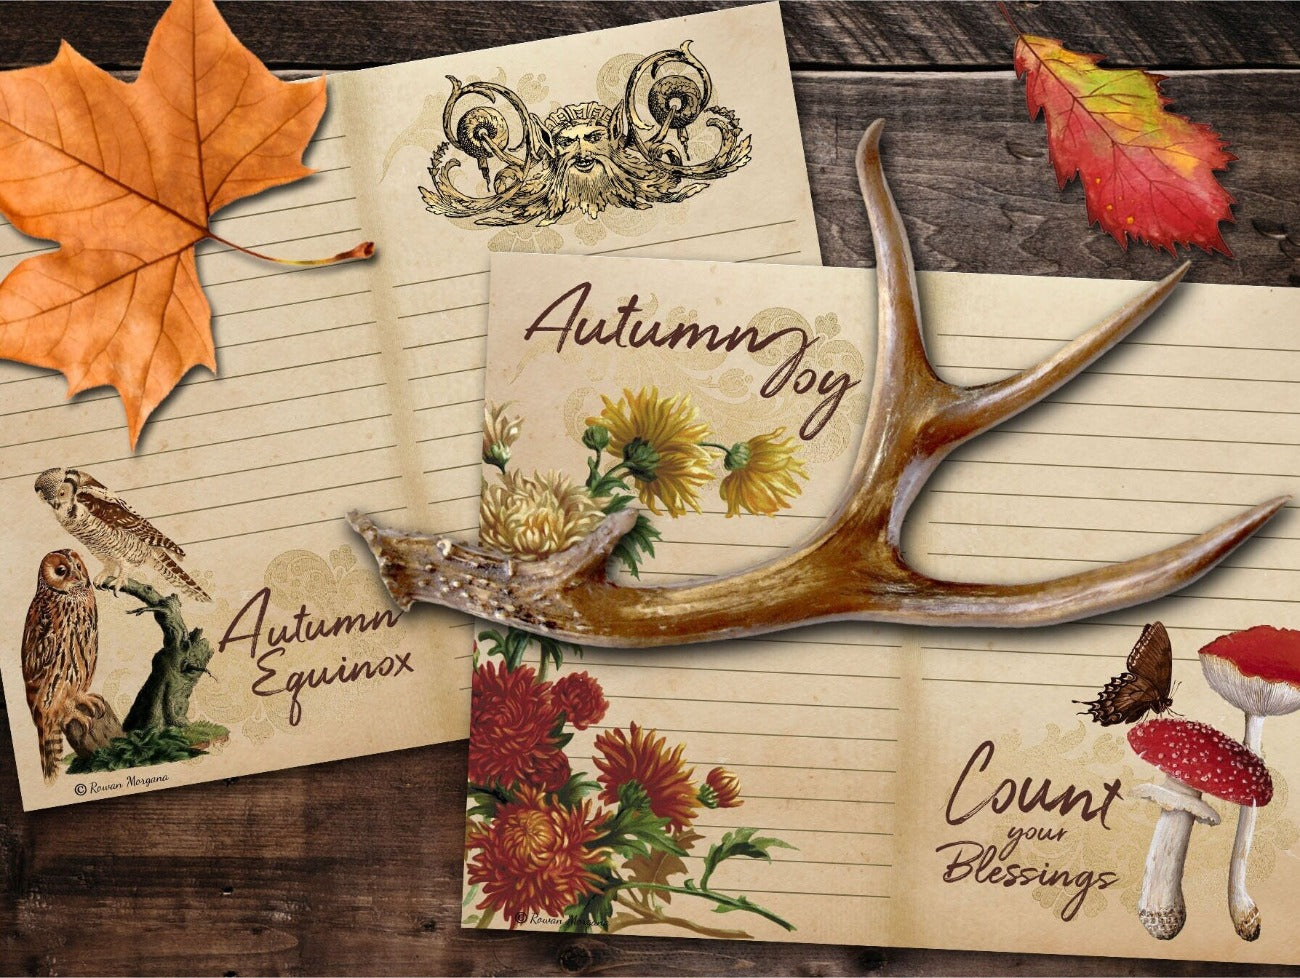 Autumn Equinox, Autumn Joy and Count your Blessings, MABON JUNK JOURNAL Kit Printable Pages - Morgana Magick Spell